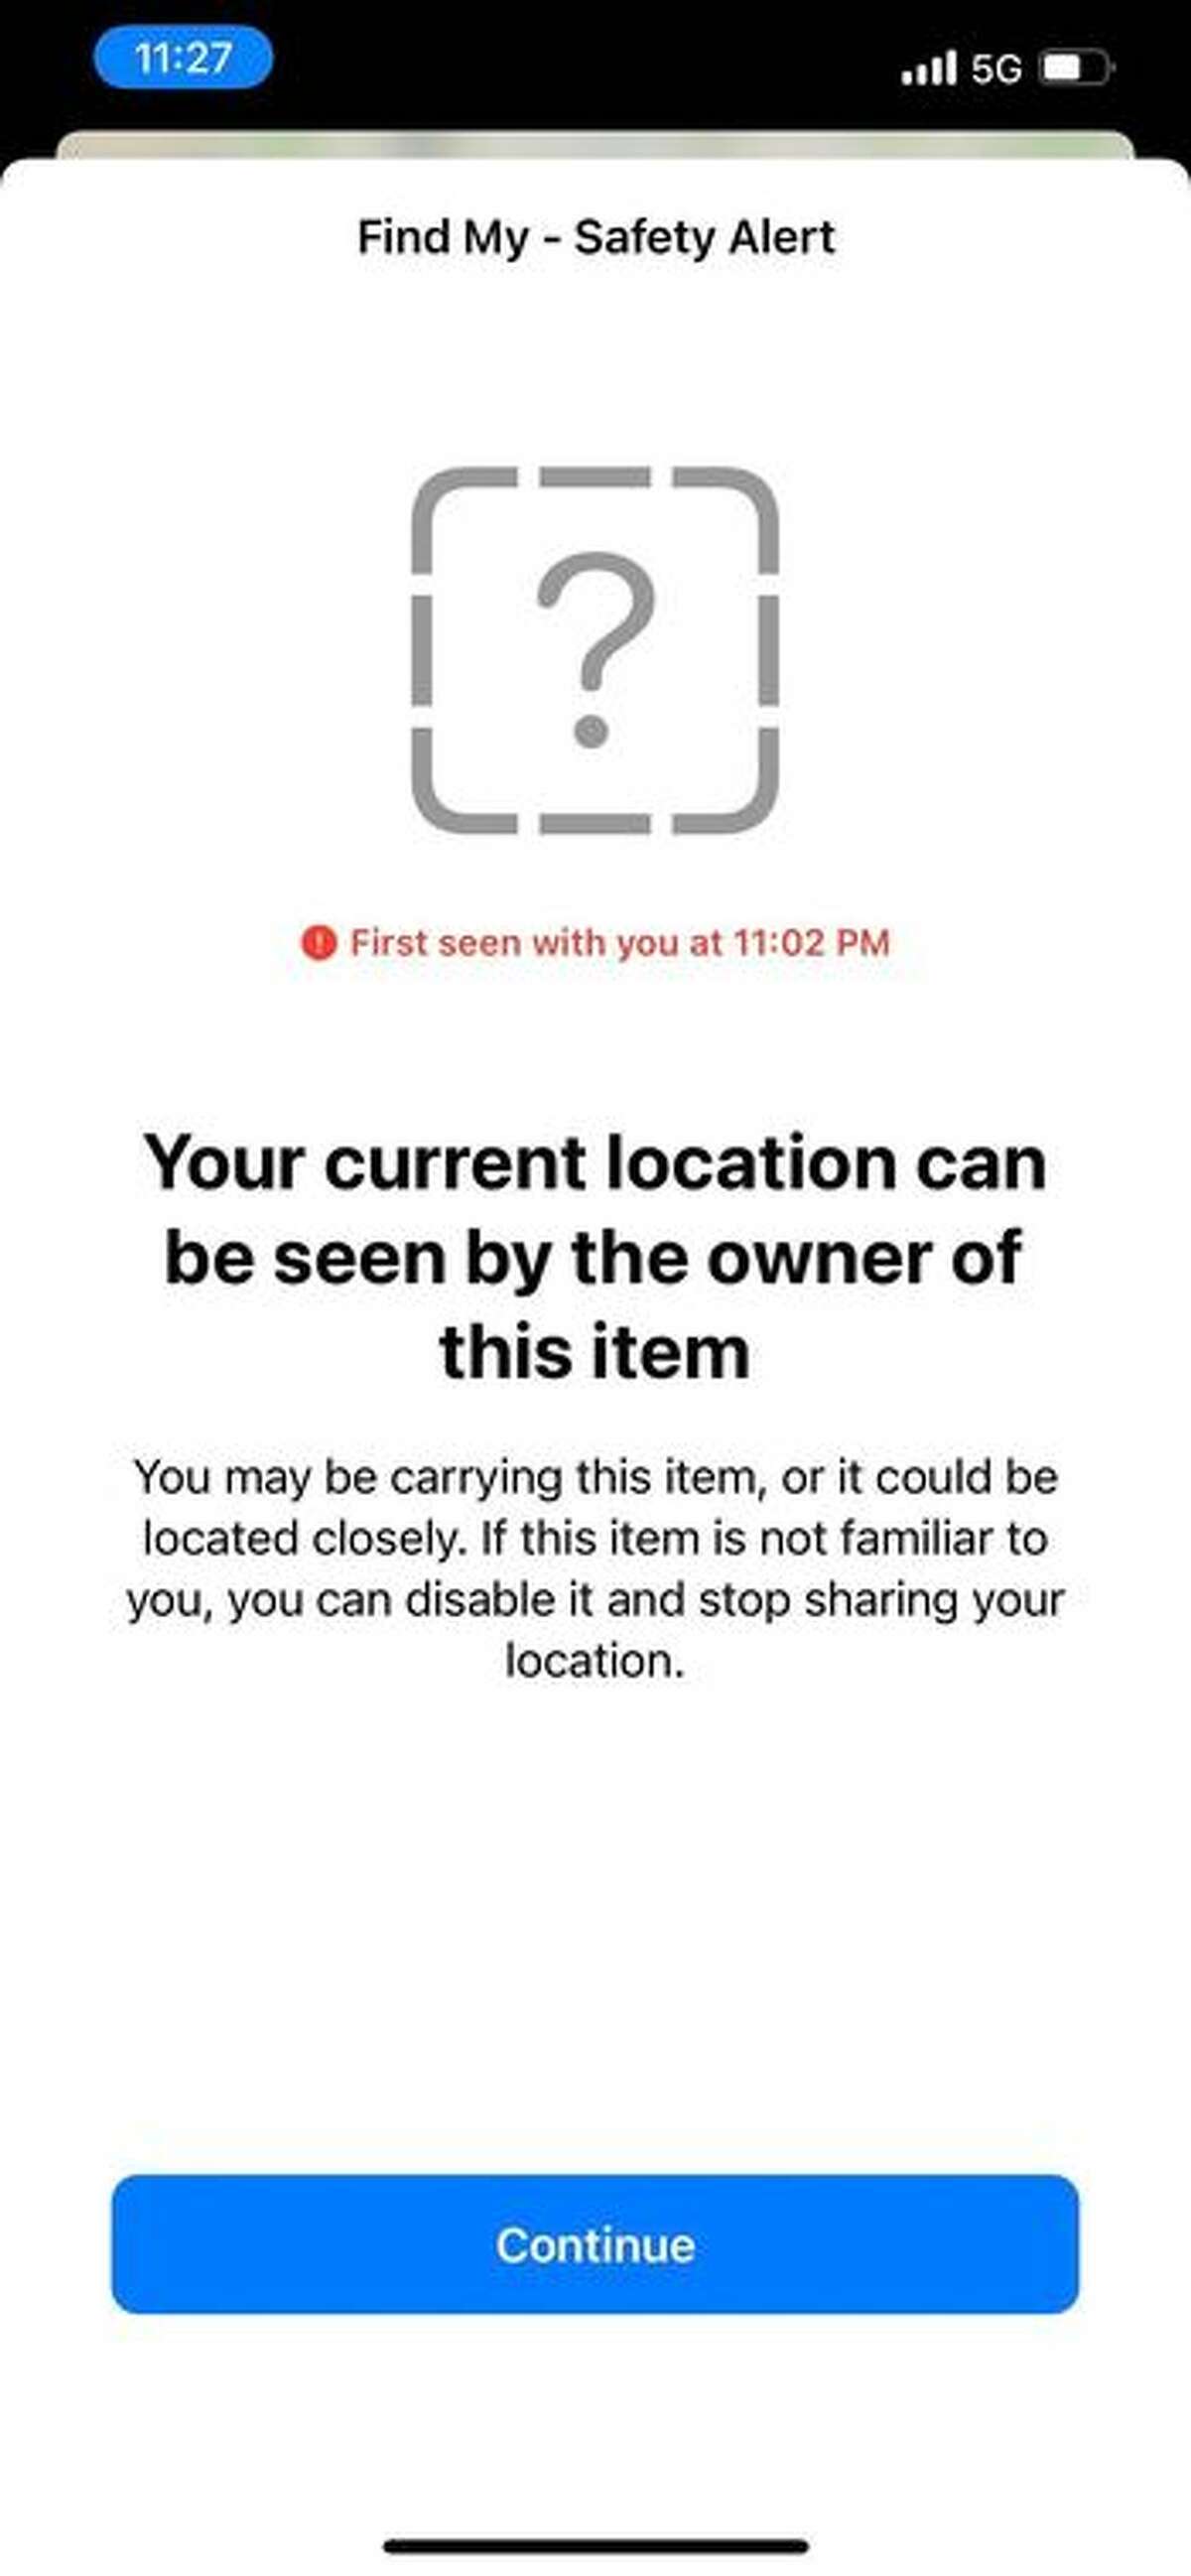 Screenshots from Raven Lemon's iPhone show that an AirPod device has been tracking her location for more than 15 minutes after leaving a Houston area restaurant.